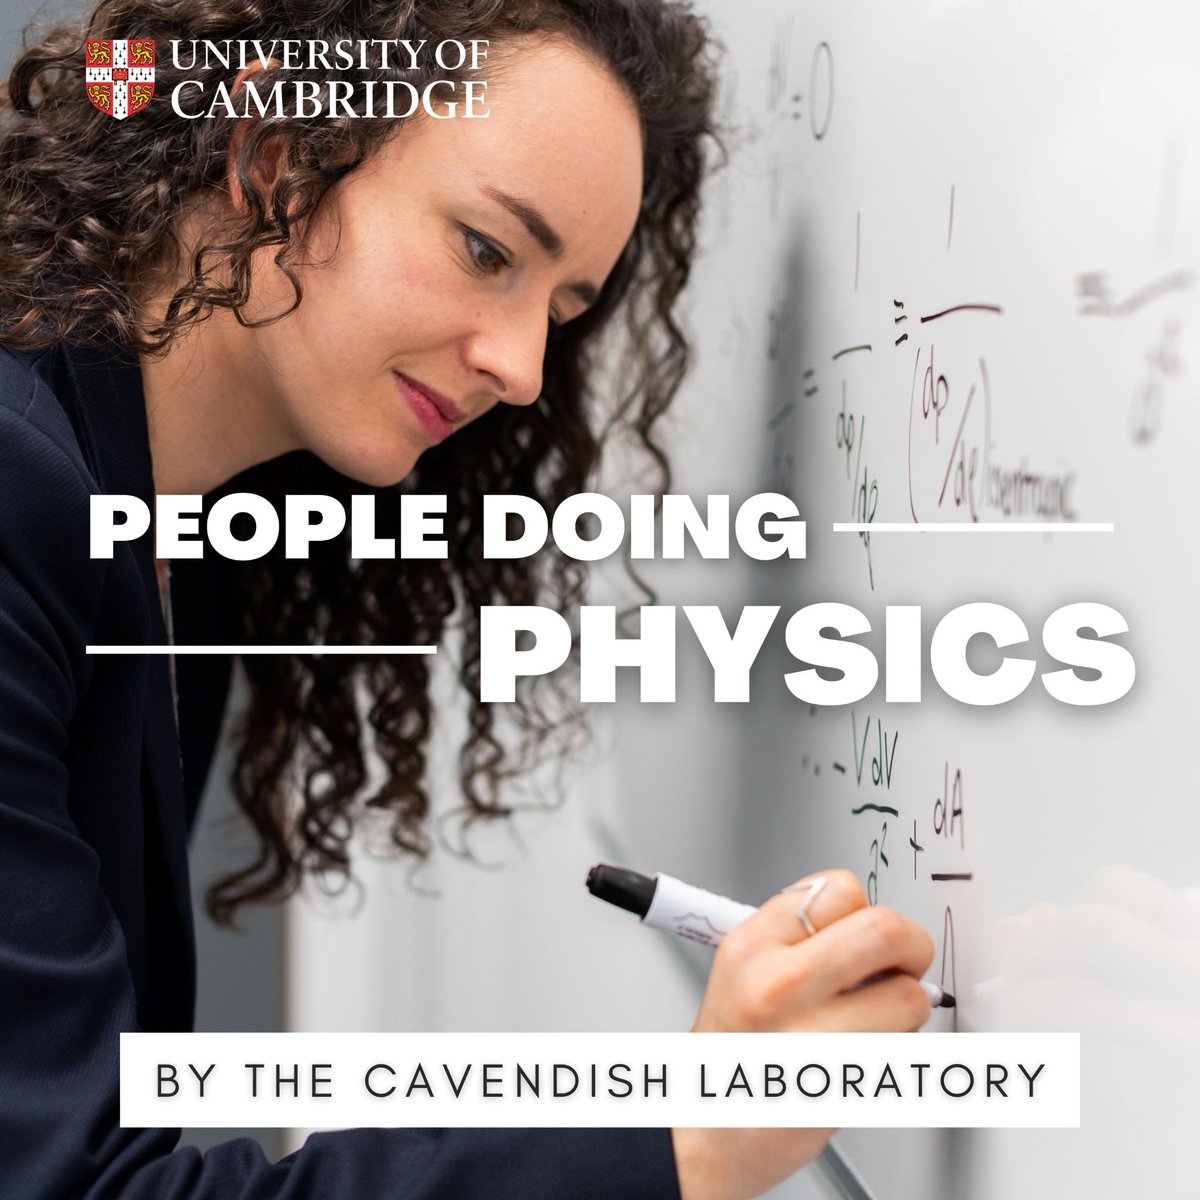 🎧 NEW PODCAST ALERT!

Get to know the people behind the cutting-edge research changing our world at @DeptofPhysics with #PeopleDoingPhysics, a new Cambridge #podcast. 

▶️ @LouiseHirstUCam is the first guest: ow.ly/MAUJ50HMUjk